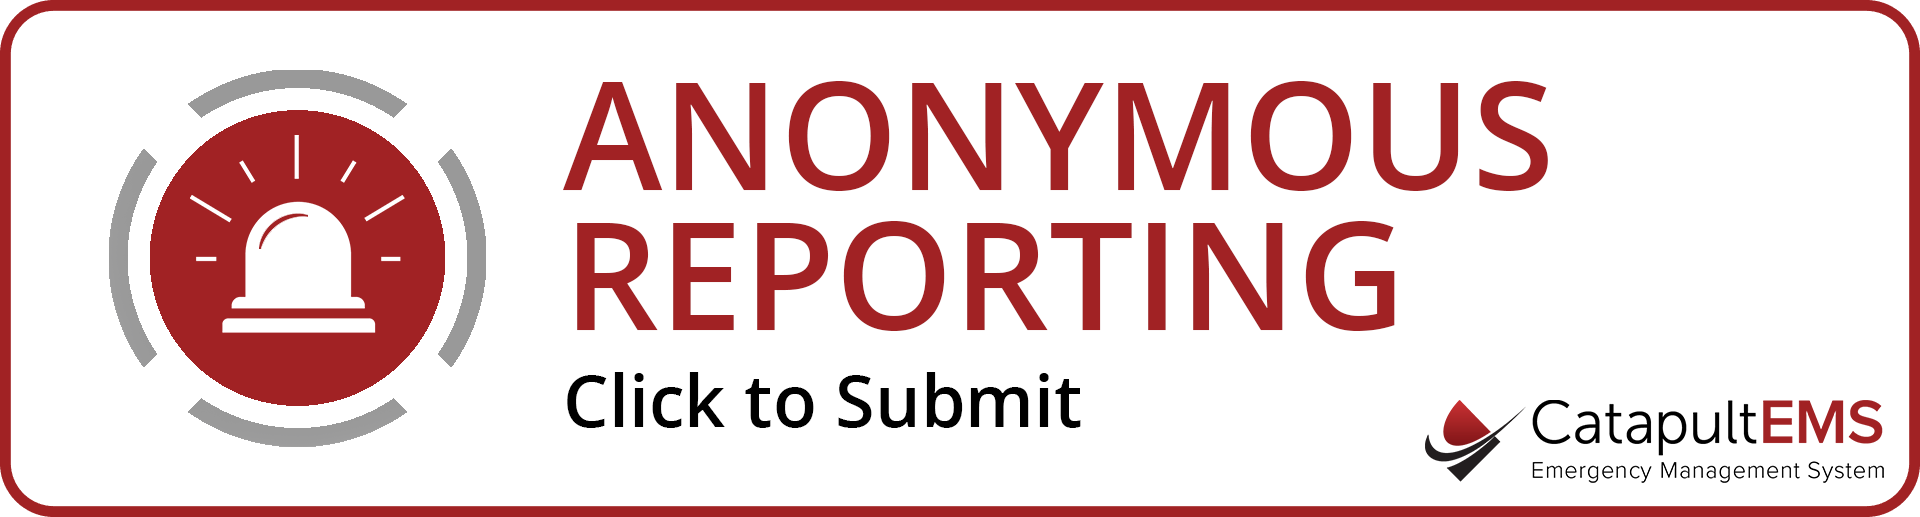 Anonymous Reporting - Click to submit - CatapultEMS Emergency Management System